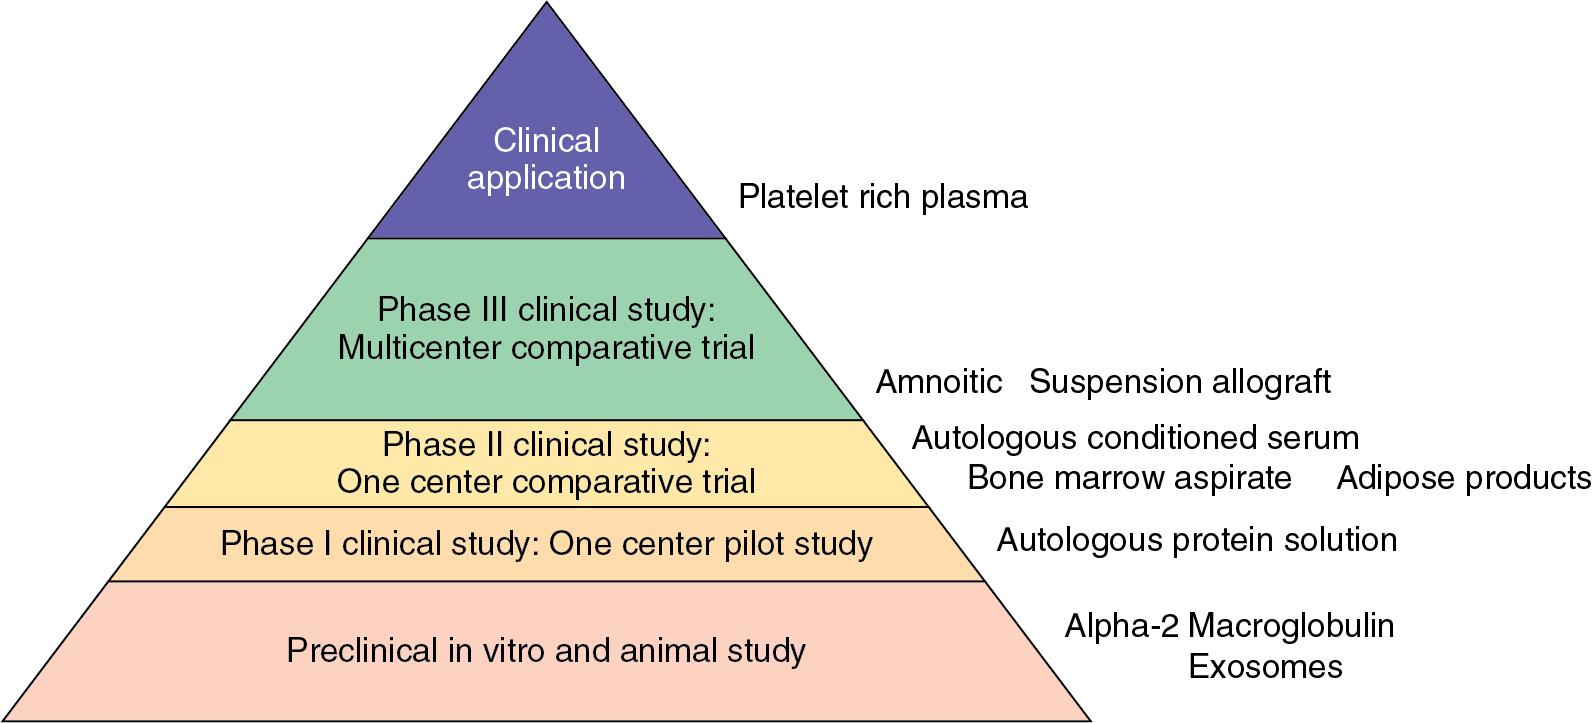 Fig. 107.1, The translational pyramid for biologics and the current progress of available products on the pathway toward evidence-based clinical practice.